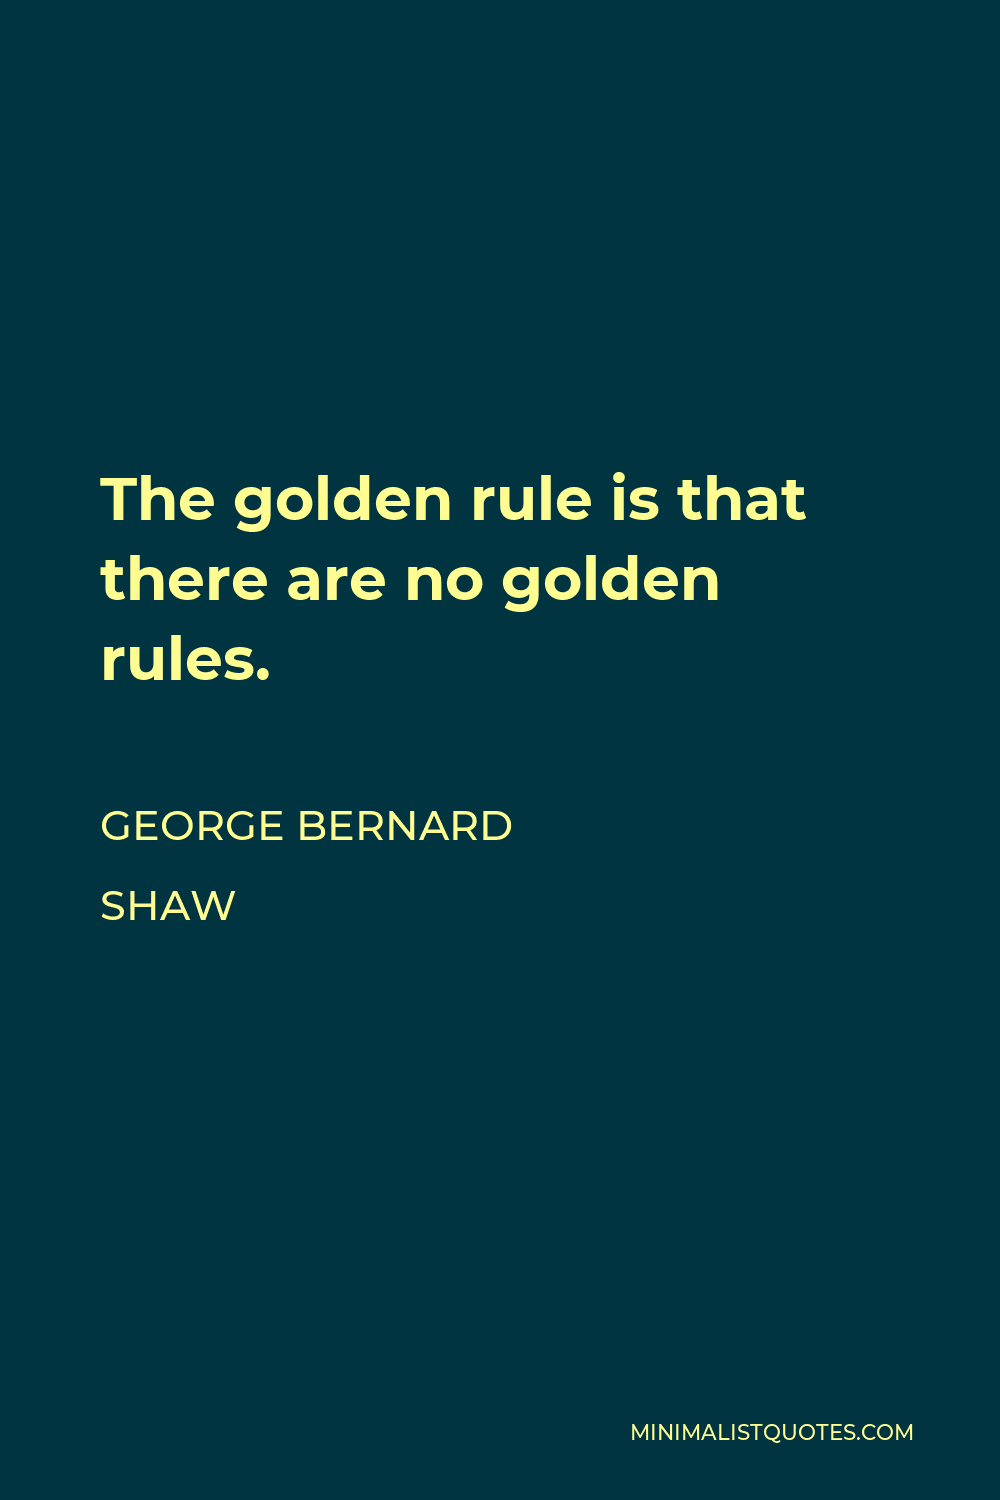 George Bernard Shaw Quote - The golden rule is that there are no golden rules.